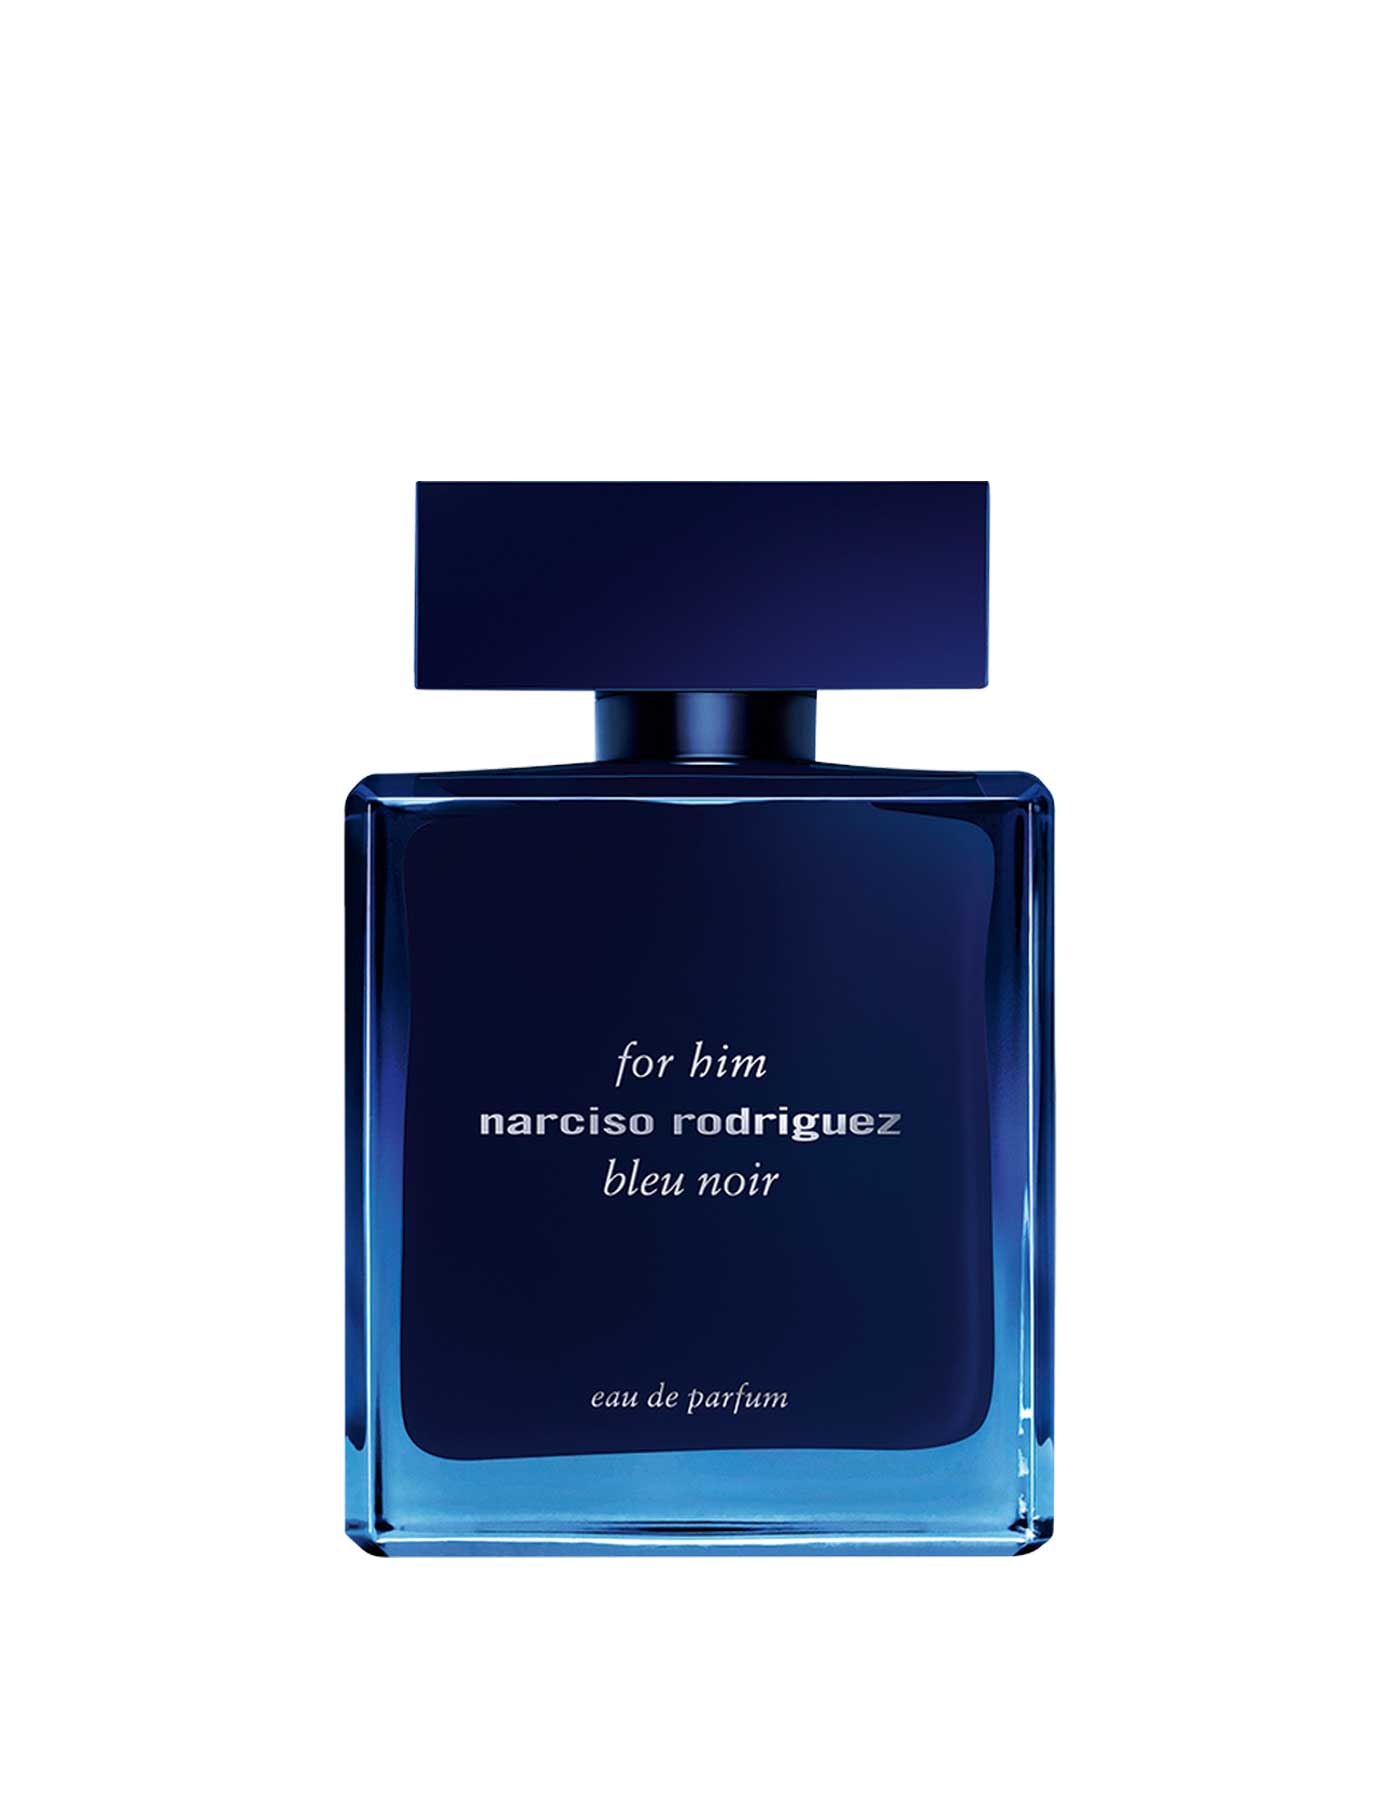 Narciso Rodriguez for Him: Seductive and Masculine